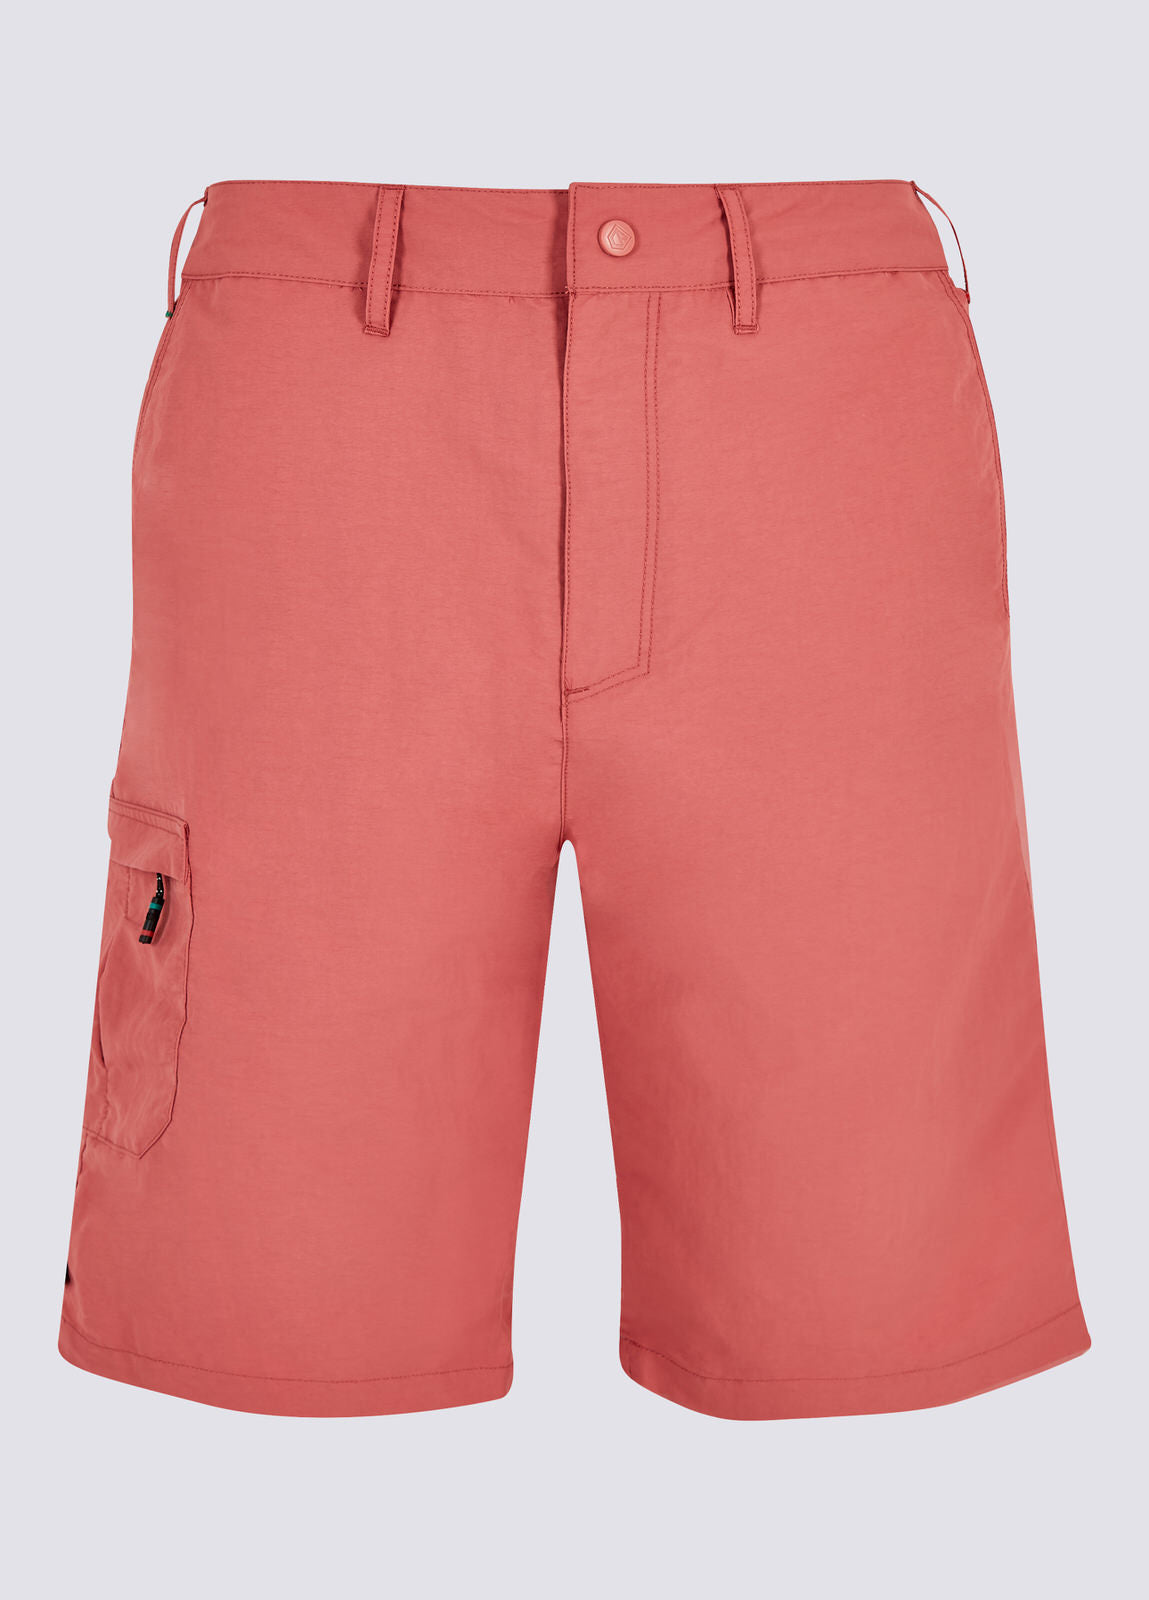 Cyprus Mens Crew Shorts - Red